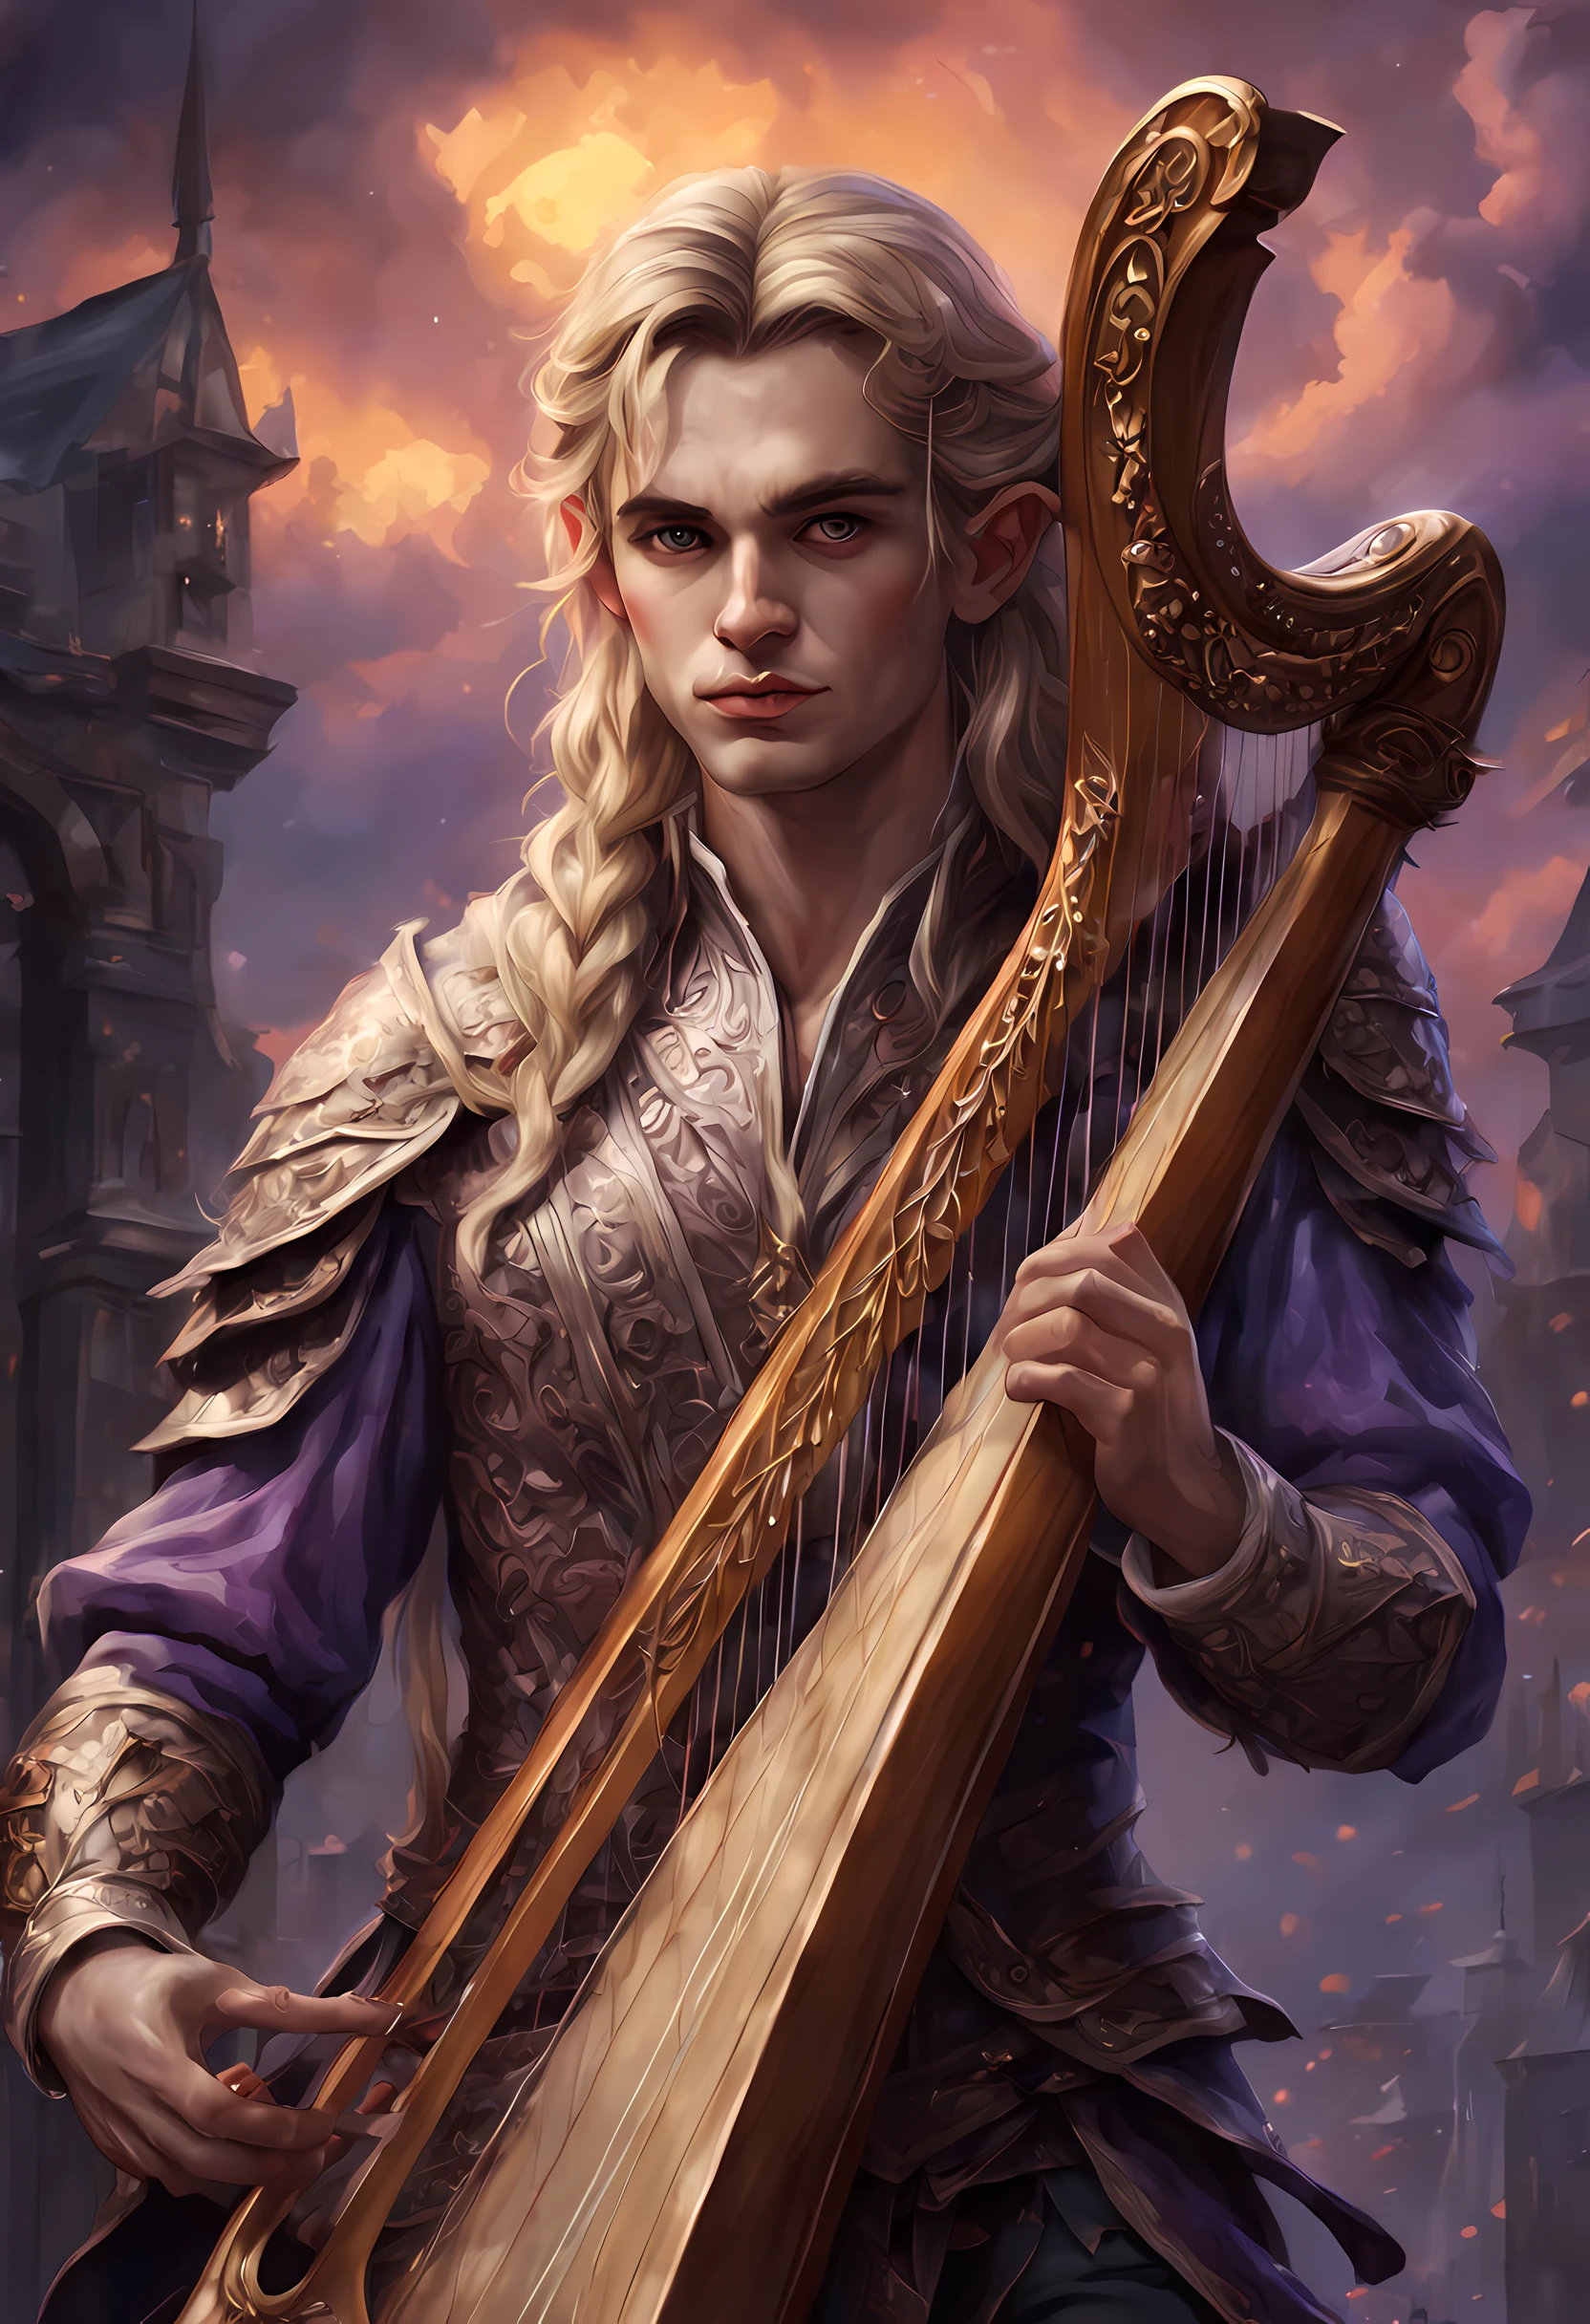 antasy art, dnd art, RPG art, wide shot, drkfntasy (masterpiece:1.3), full body, intense details, highly detailed, photorealistic, best quality, highres, portrait of 1(male: 1.4) half elf (fantasy art, Masterpiece, best quality: 1.ale skin, intense details facial detail (fantasy art, Masterpiece, best quality: 1.4) bard, exquisite beauty, (blond hair: 1.3), braided hair, smirking in arrogance, intense purple eyeantasy art, Masterpiece, best quality: 1.3) holding a (harp: 1.4) (fantasy art, Masterpiece, best quality: 1.4)wearing heavy (heavy armor, wearing) F41Arm0rXL wearing laced boots, wearing a cloak, smiling an arrogant smile, standing in fantasy street, there are (dark red clouds: 1.3) , (dark yellows clouds: 1.3) above, sense of gloom, sense of dread, depth of field, reflection light, high details, best quality, 16k, [ultra detailed], masterpiece, best quality, (extremely detailed), dynamic angle, ultra wide shot, photorealistic, RAW, fantasy art, dnd art, fantasy art, realistic art